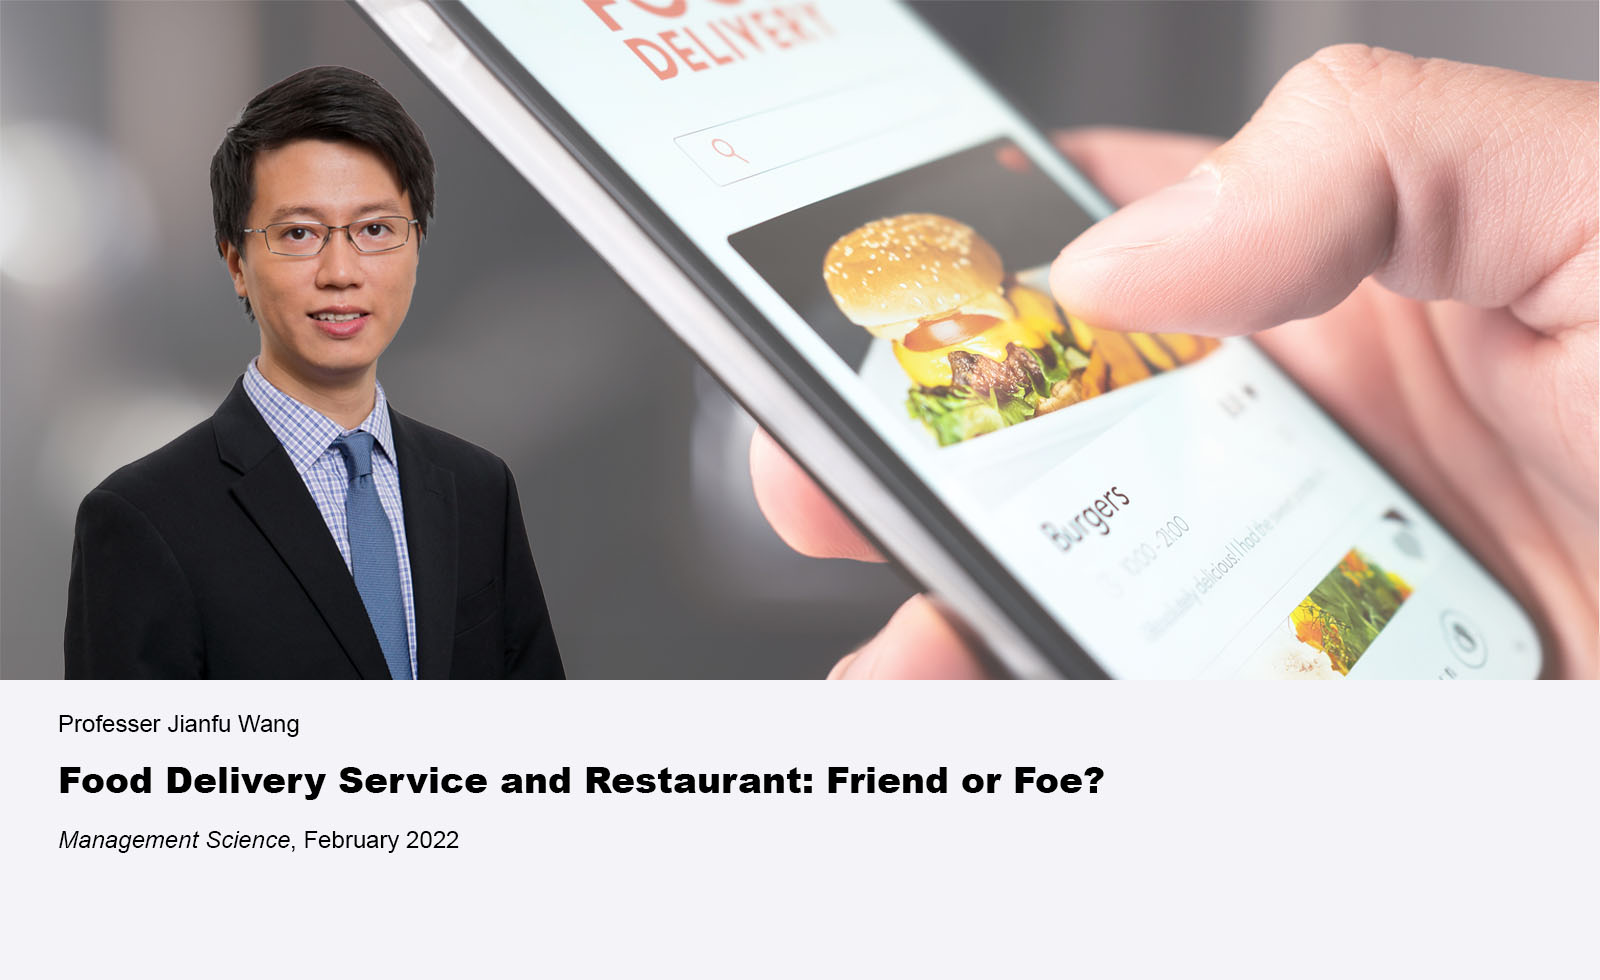 Food Delivery Service and Restaurant: Friend or Foe?